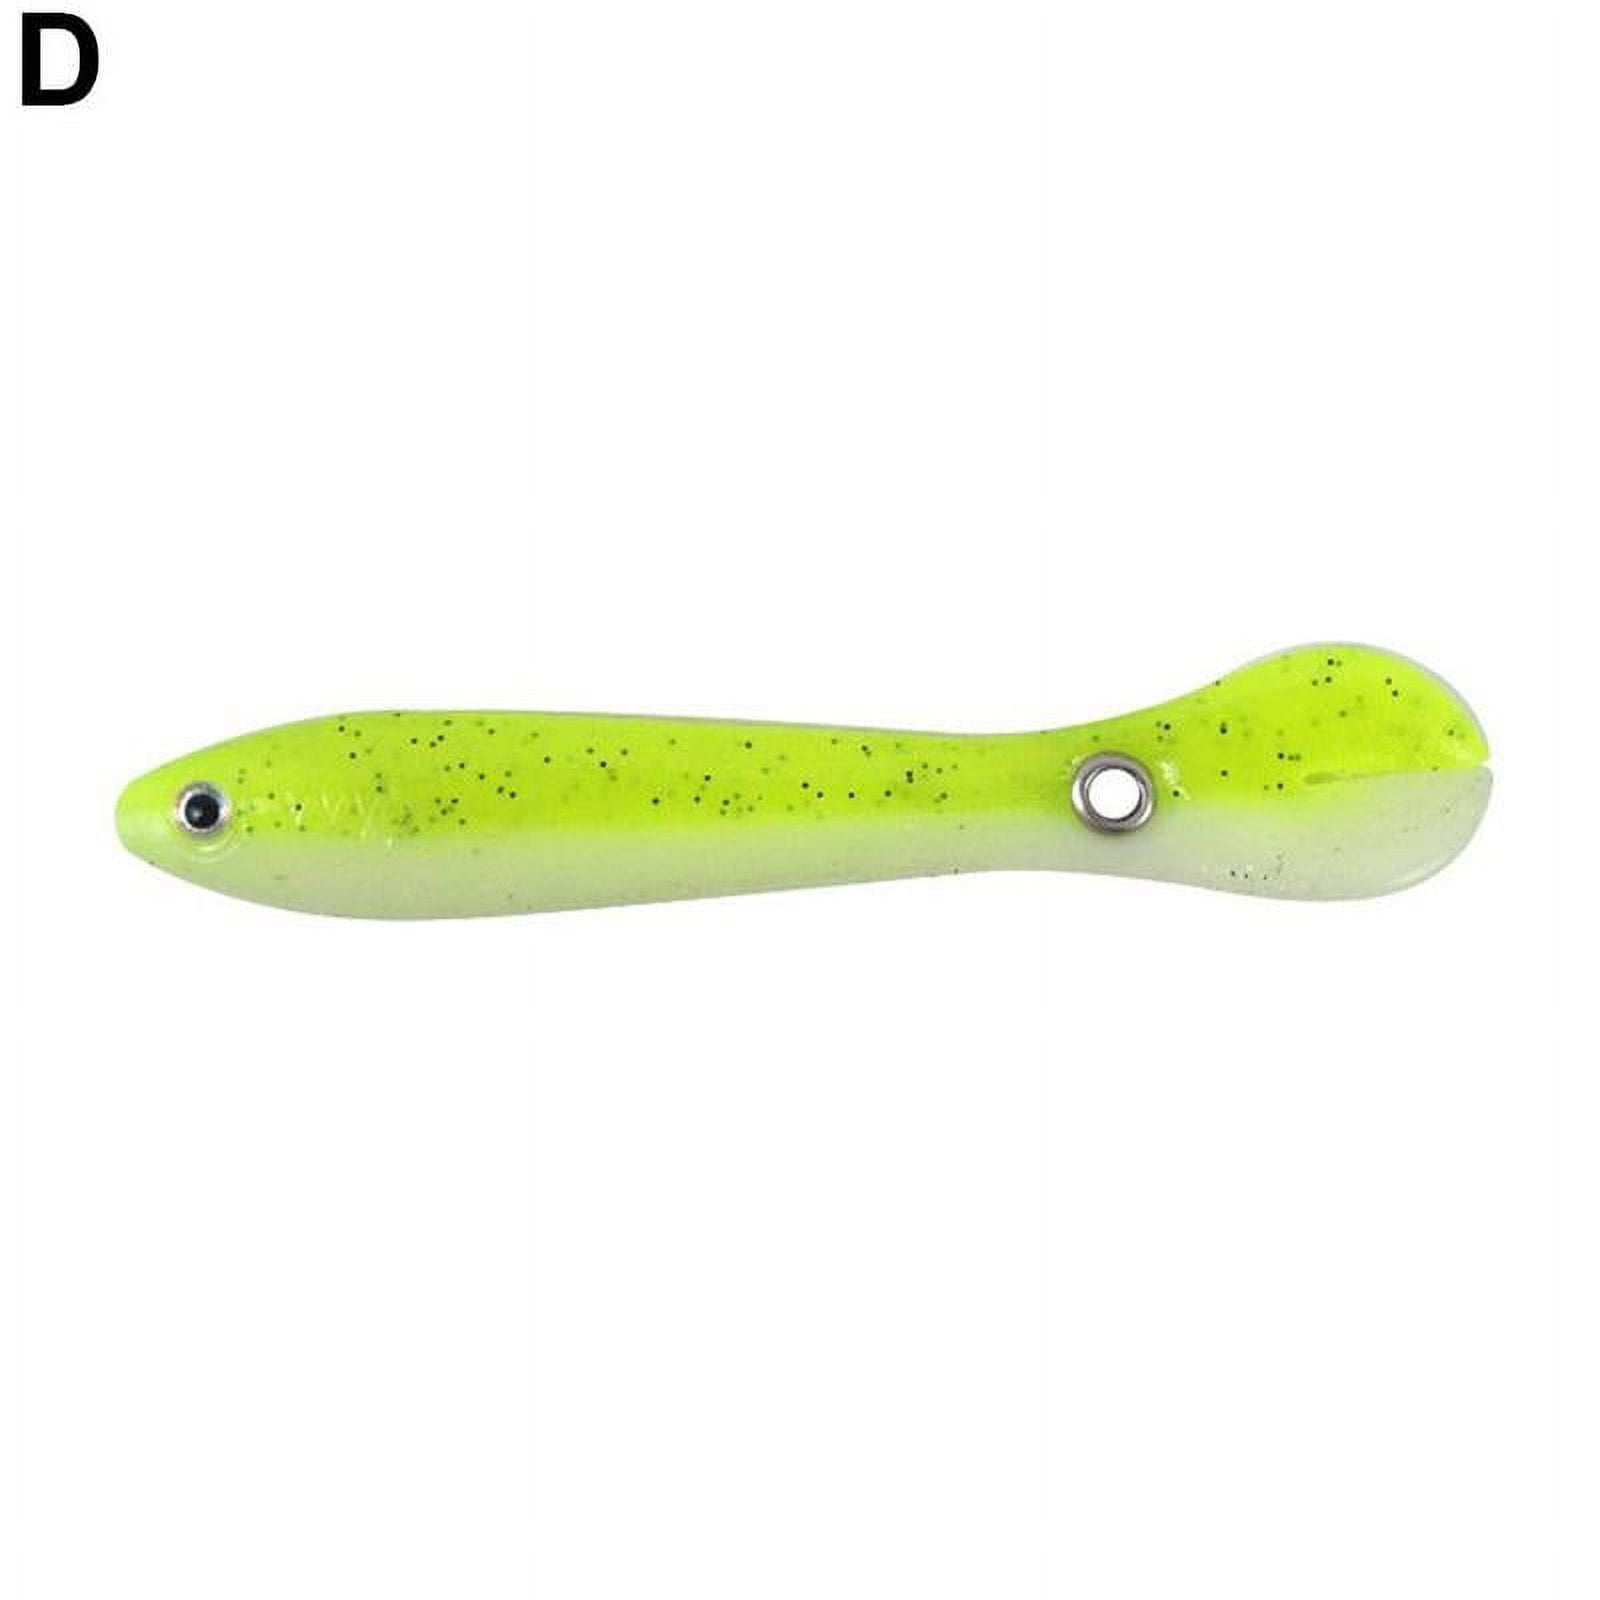 Spoon Lures, Fishing Lures Sequin Hard Metal For Saltwater 20g 